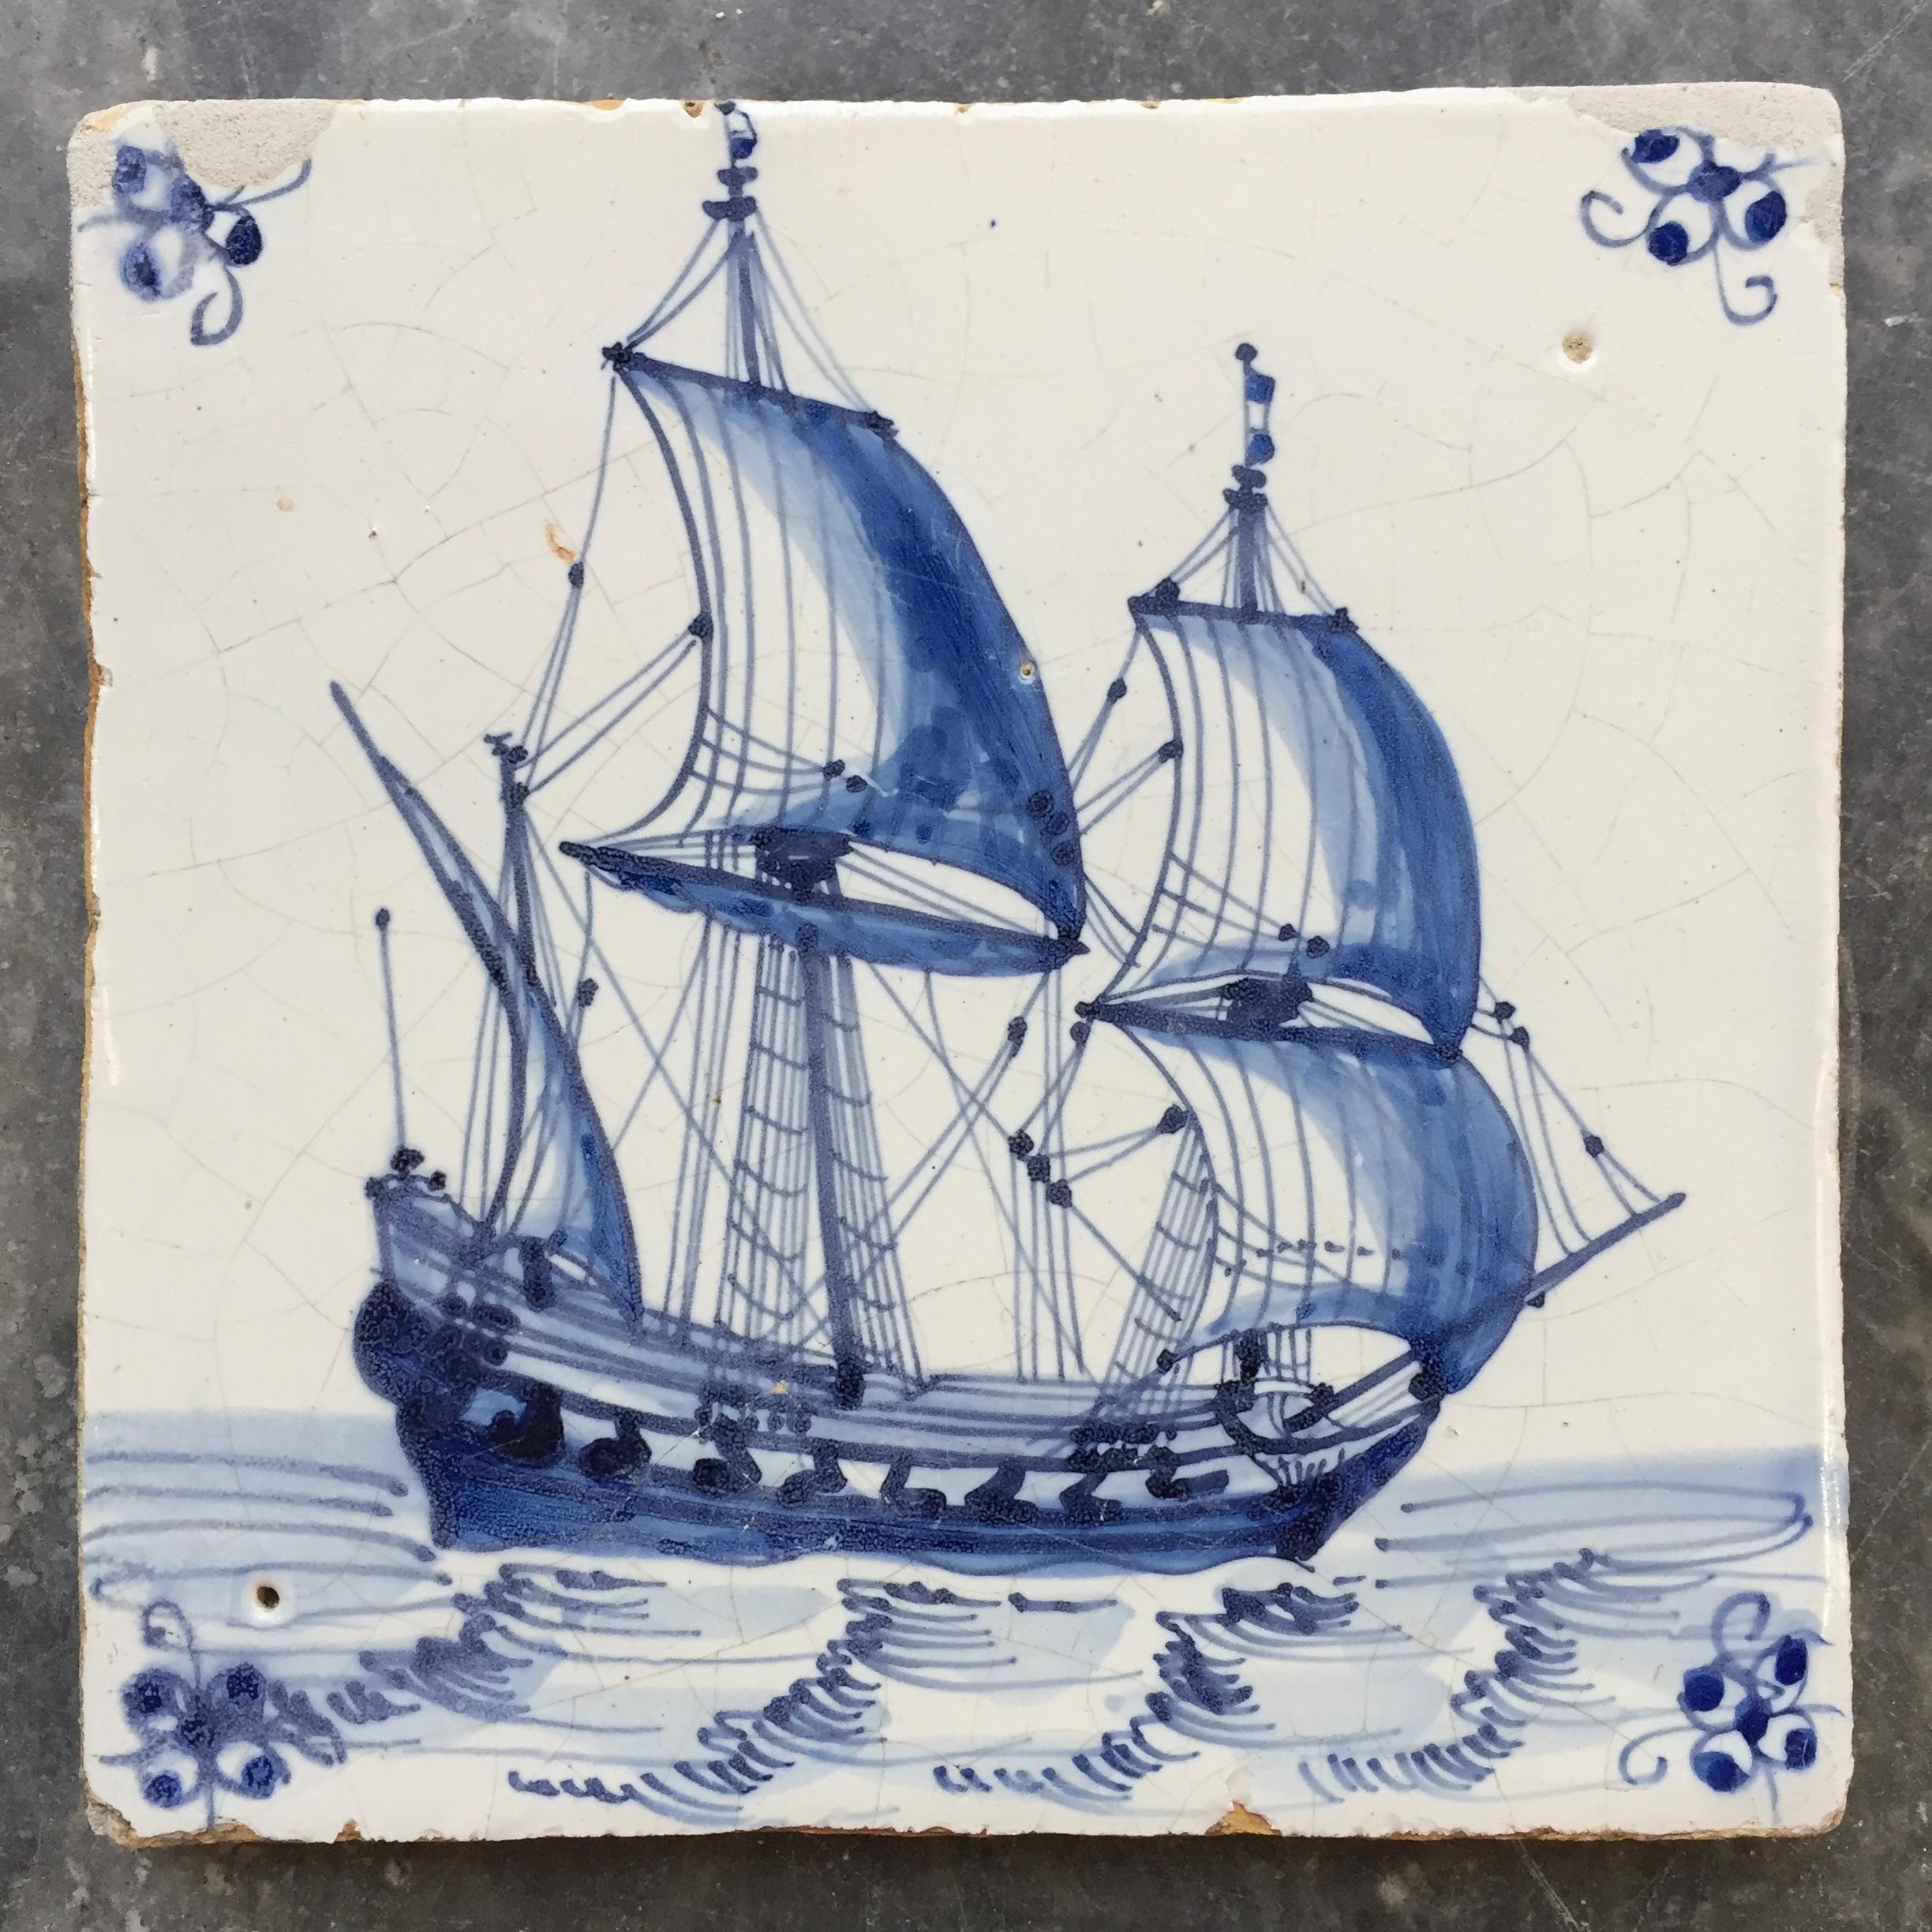 The Netherlands
Circa 1640 - 1660

A fine-painted Dutch Delft tile with a decoration of a three-master ship from the Dutch East-Indian trading company VOC or the Dutch Navy.

A genuine collectible of approximately 400 years old.